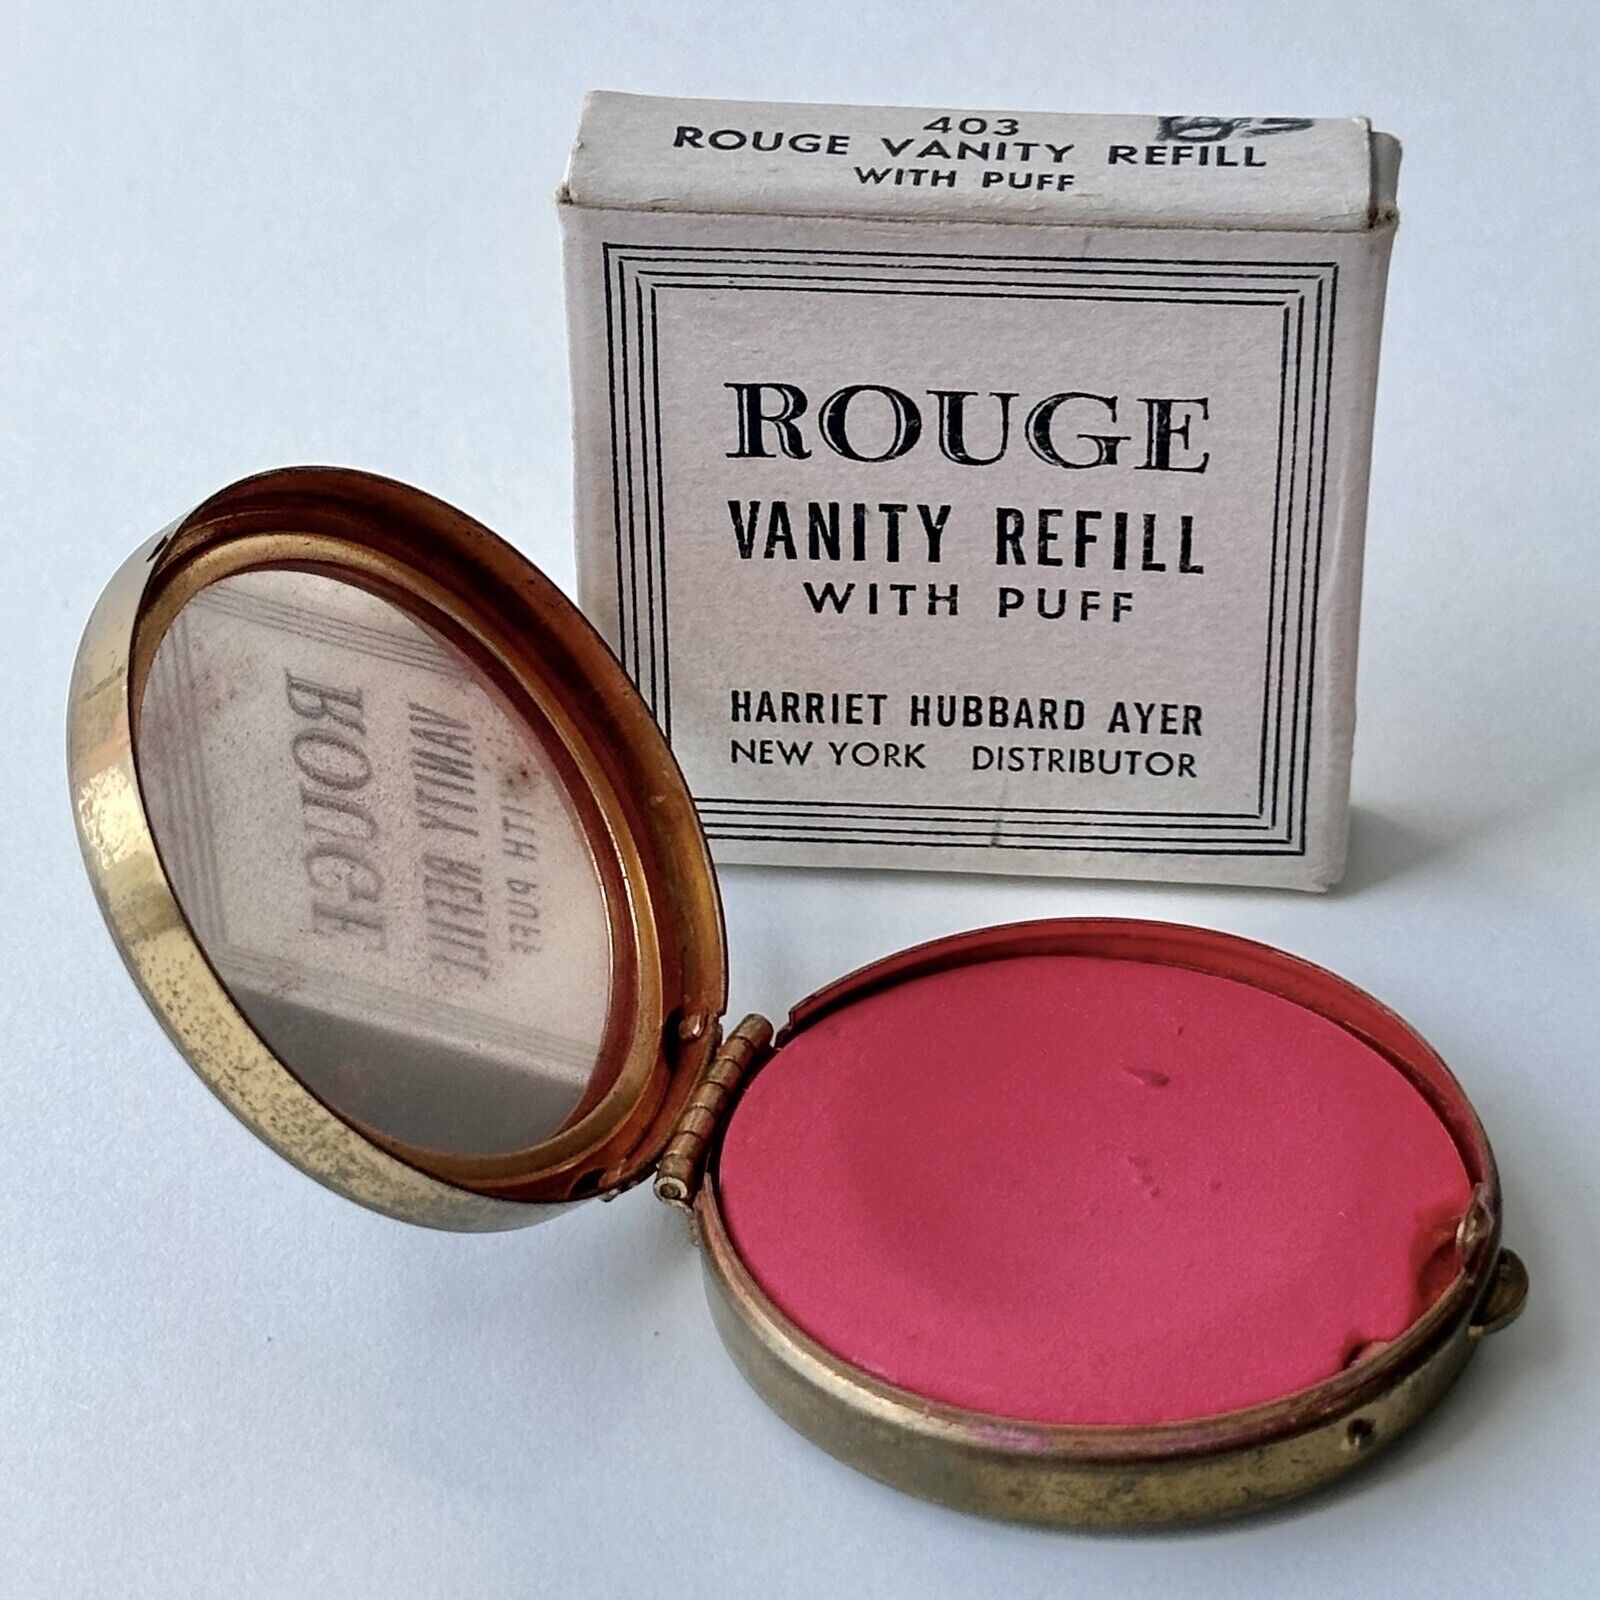 Vintage 1940s Harriet Hubbard Ayer Rouge in Flag Red & Pomegranate Refill